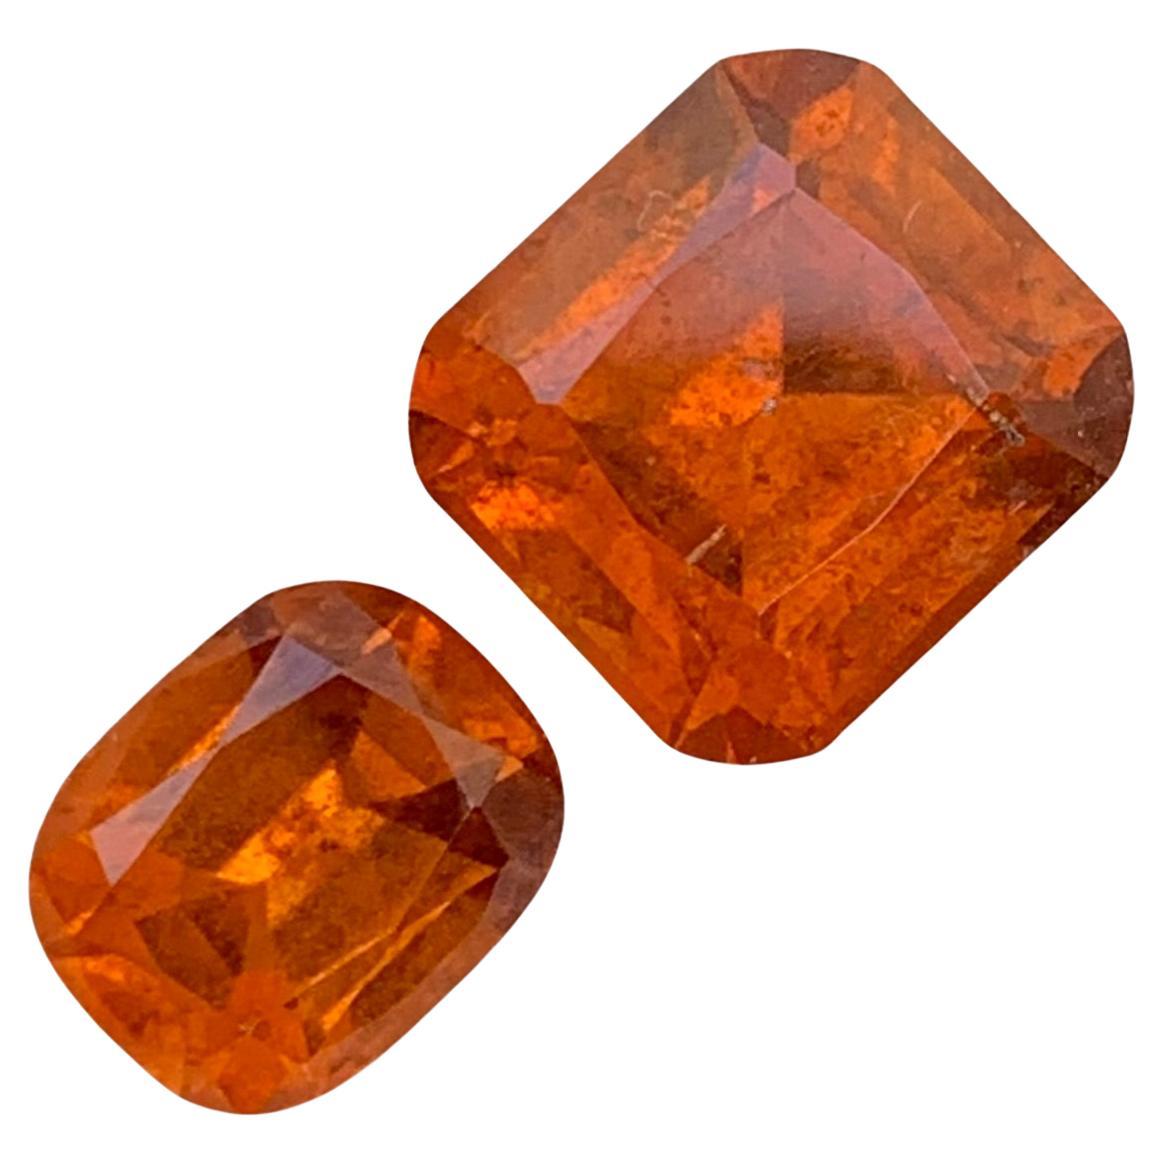 5.95 Carats Natural Loose Hessonite Garnet 2 Pieces For Ring Jewelry Making  en vente